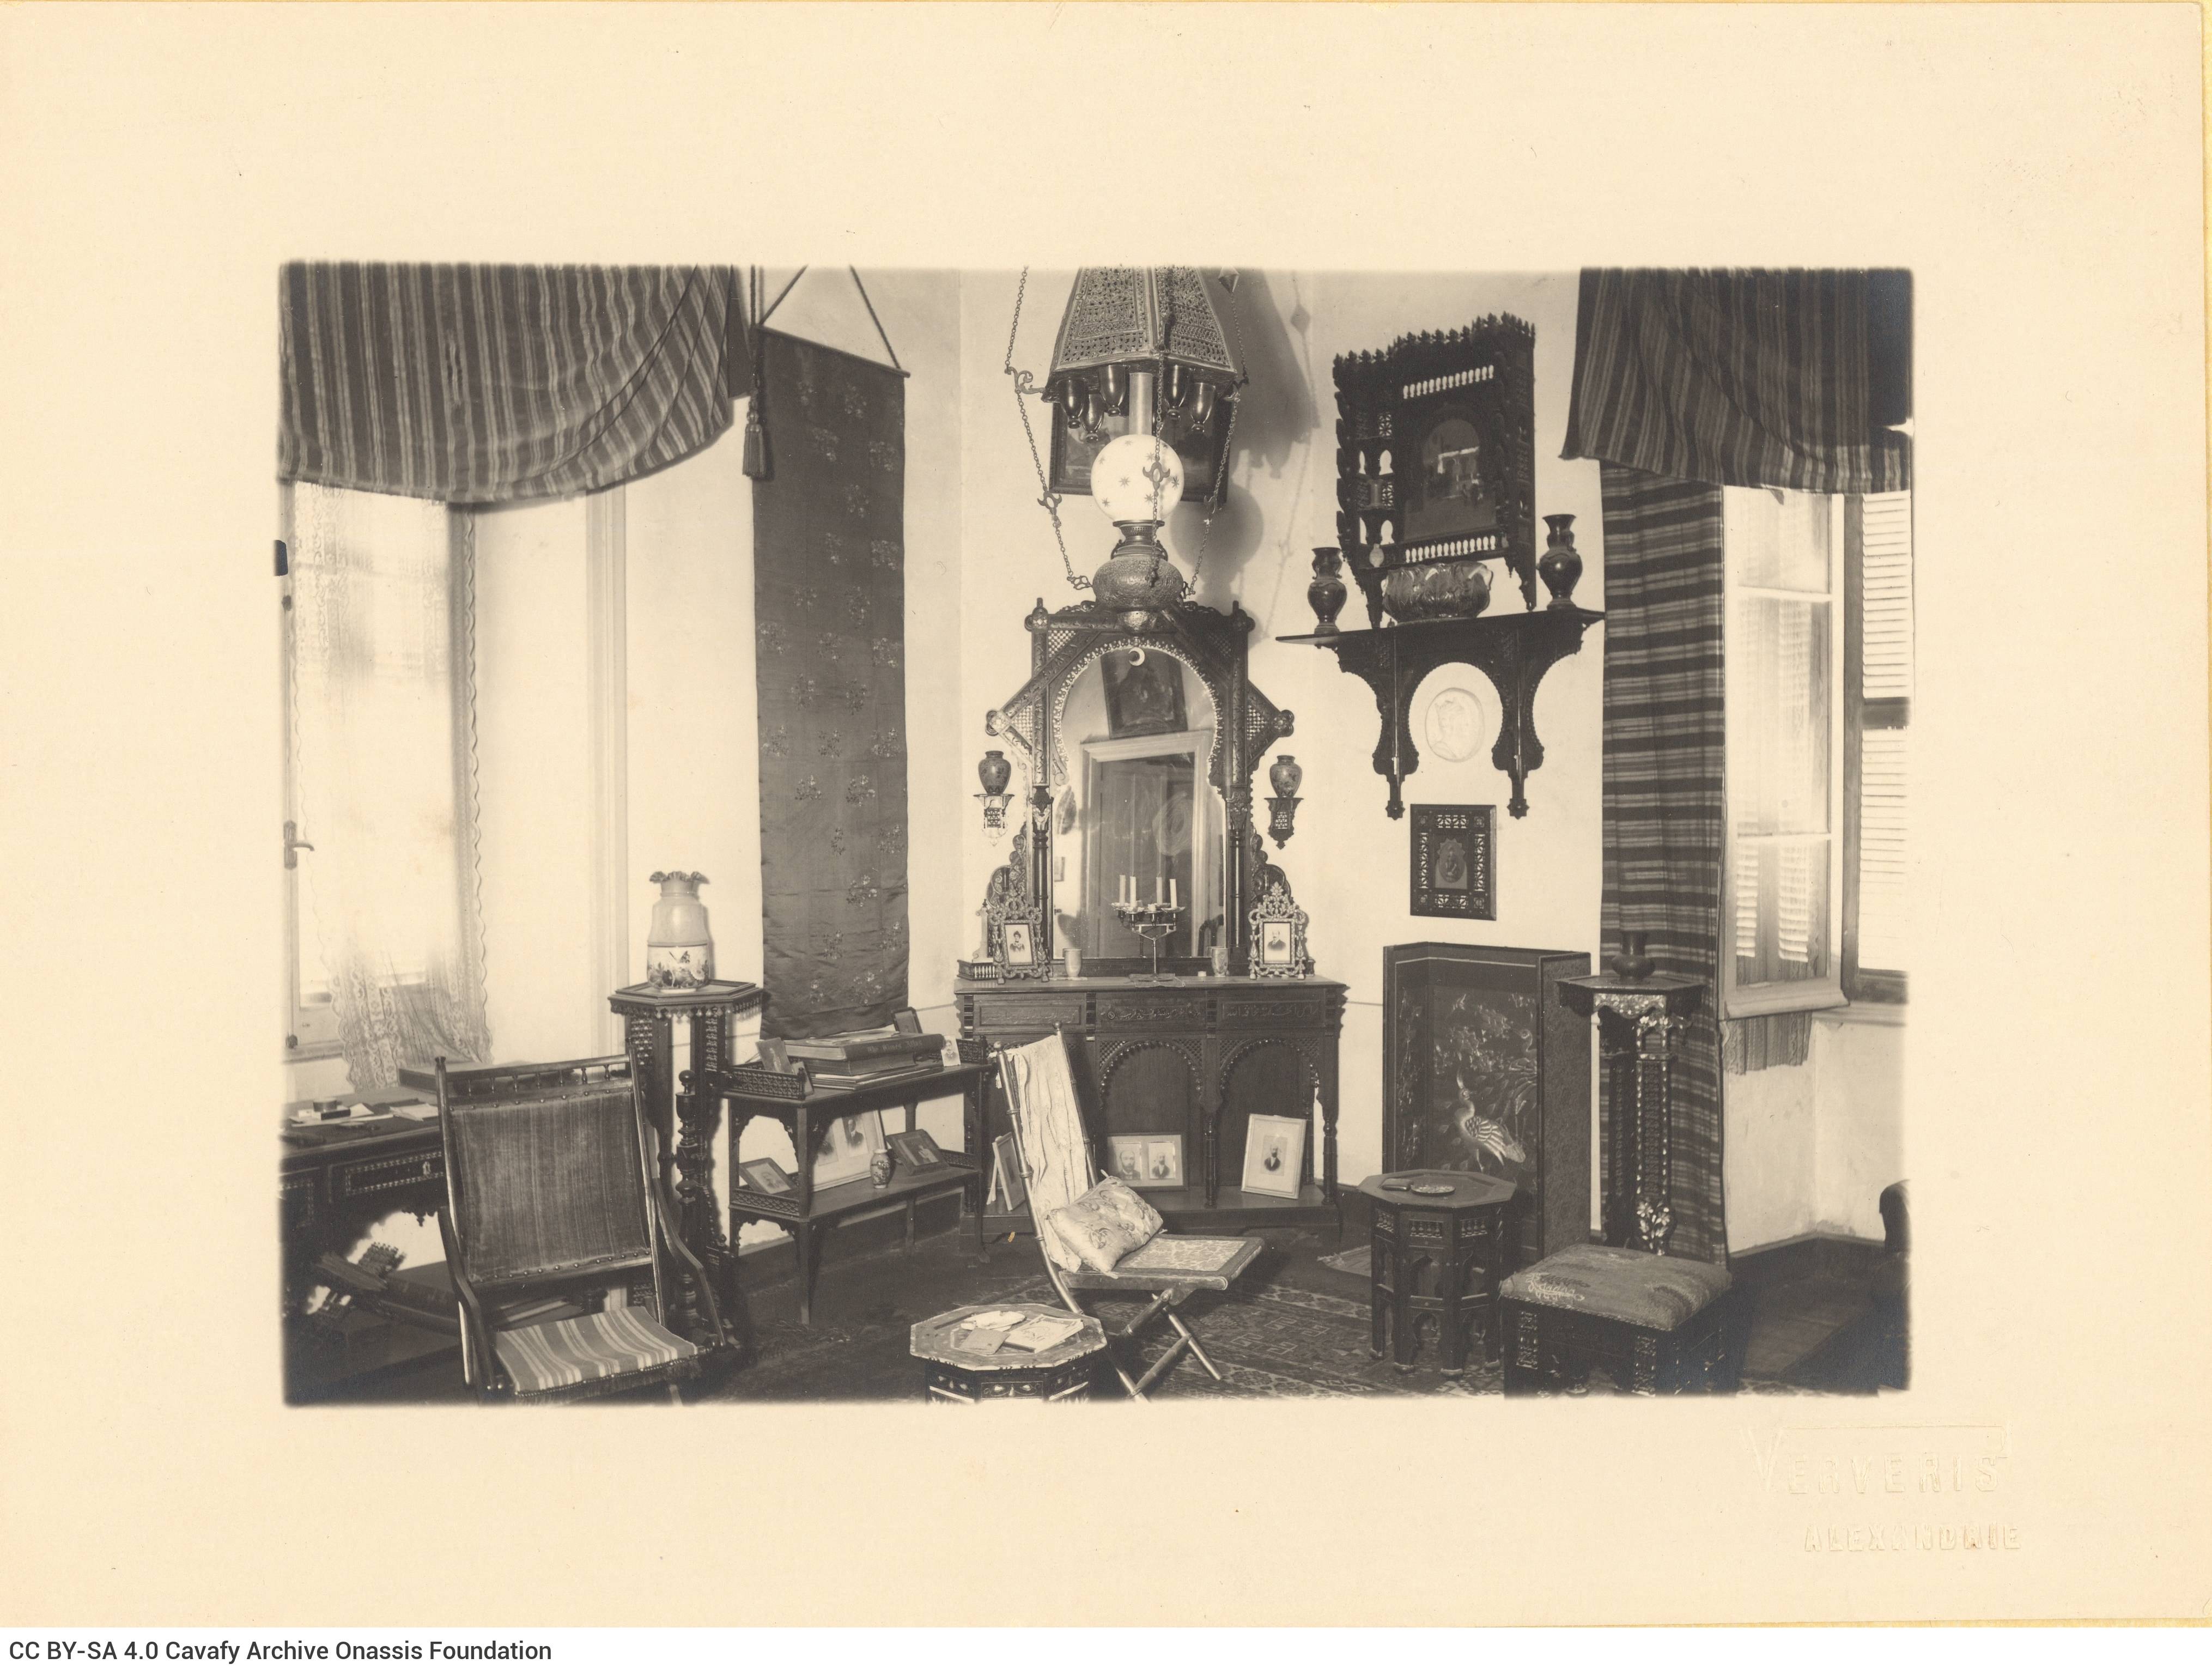 View of the interior of Cavafy's flat. It depicts the living room, with chairs, a desk and a console table with a mirror. The